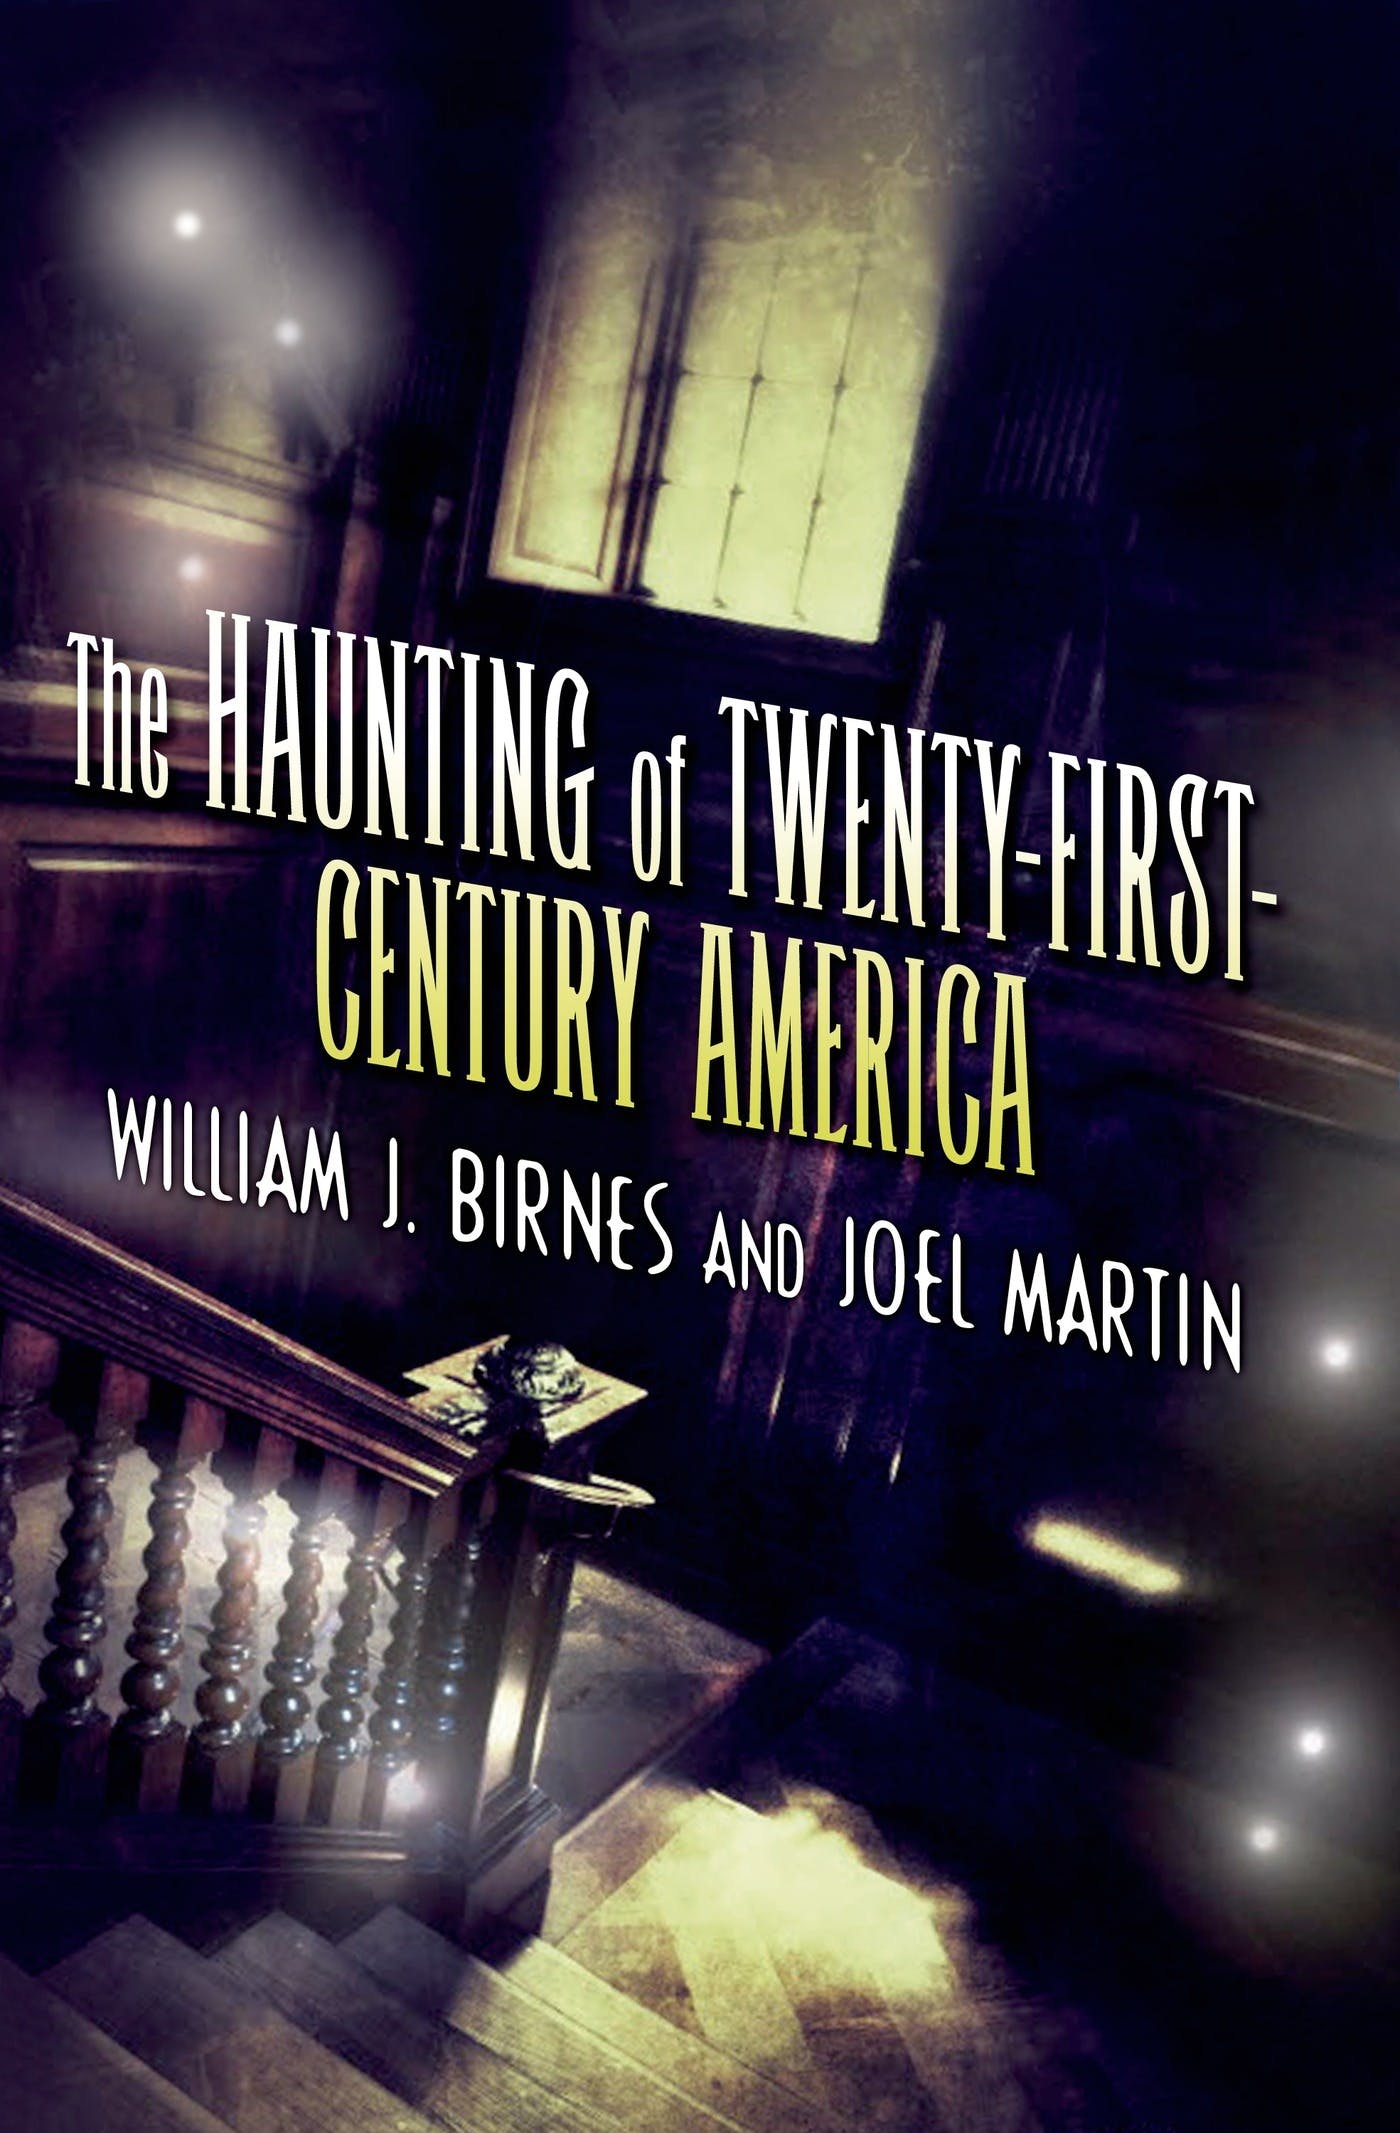 Which famous paranormal investigator is known for their work in the field of ghost hunting?